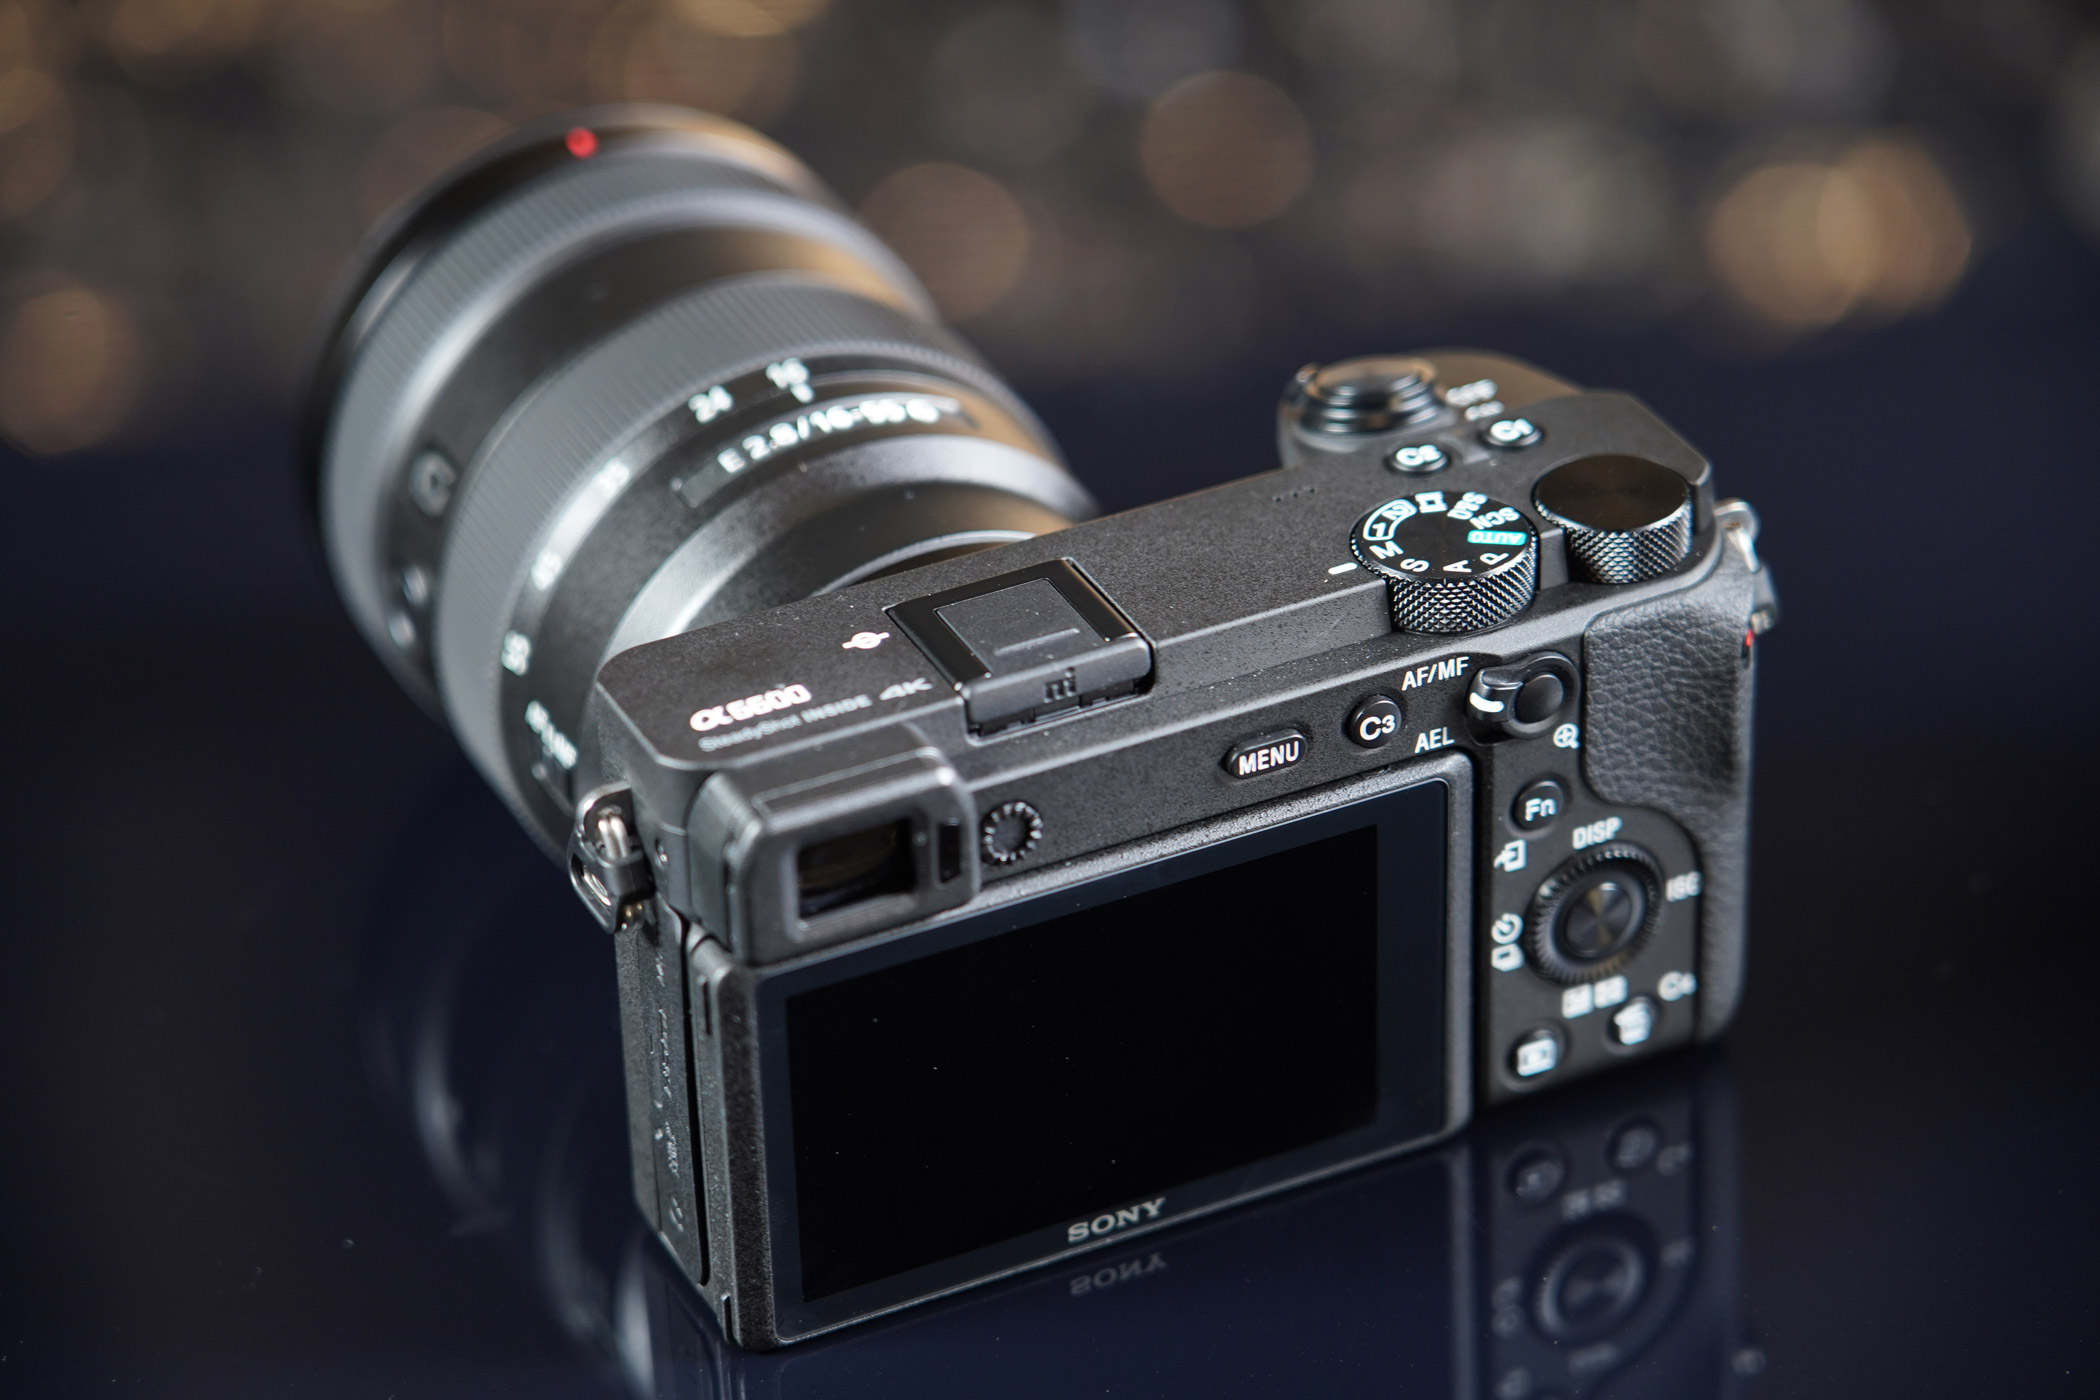 Sony Alpha 6100 And Alpha 6600 Mirrorless Cameras Arriving In